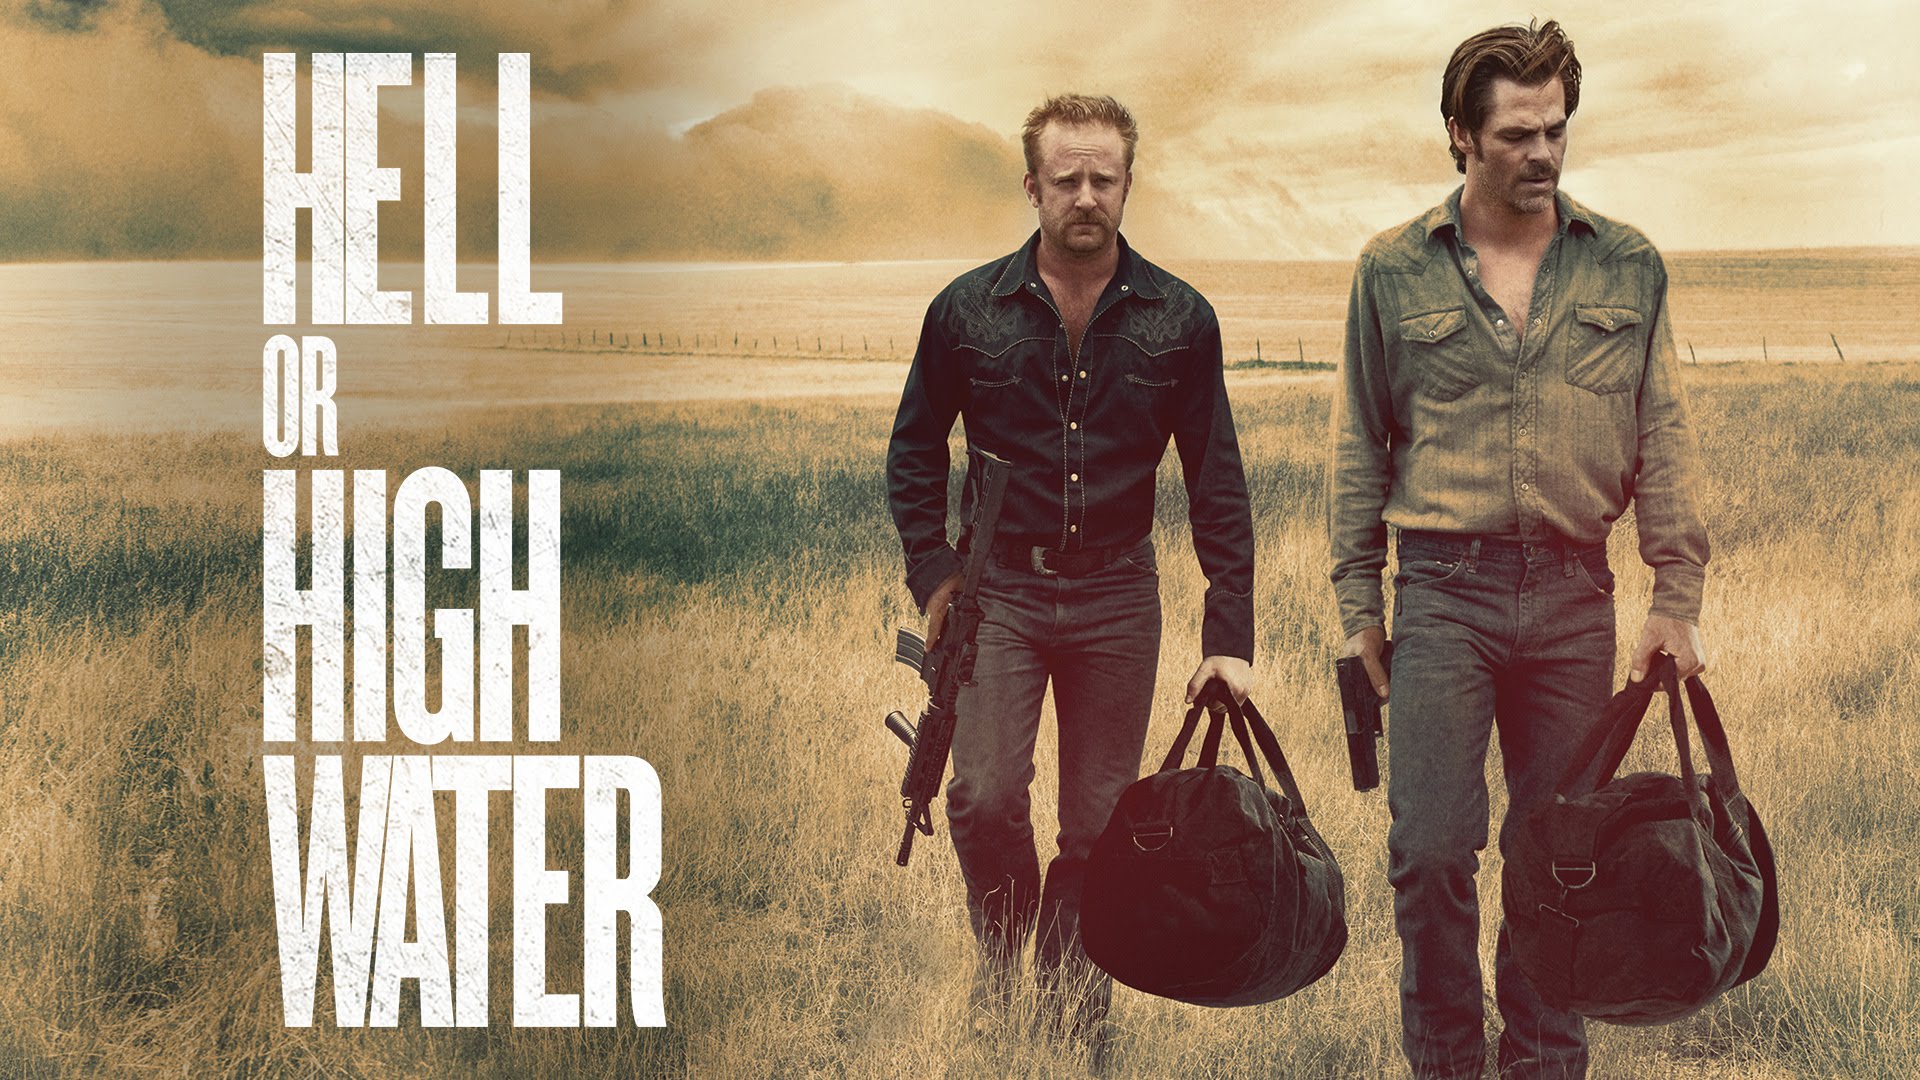 42-facts-about-the-movie-hell-or-high-water